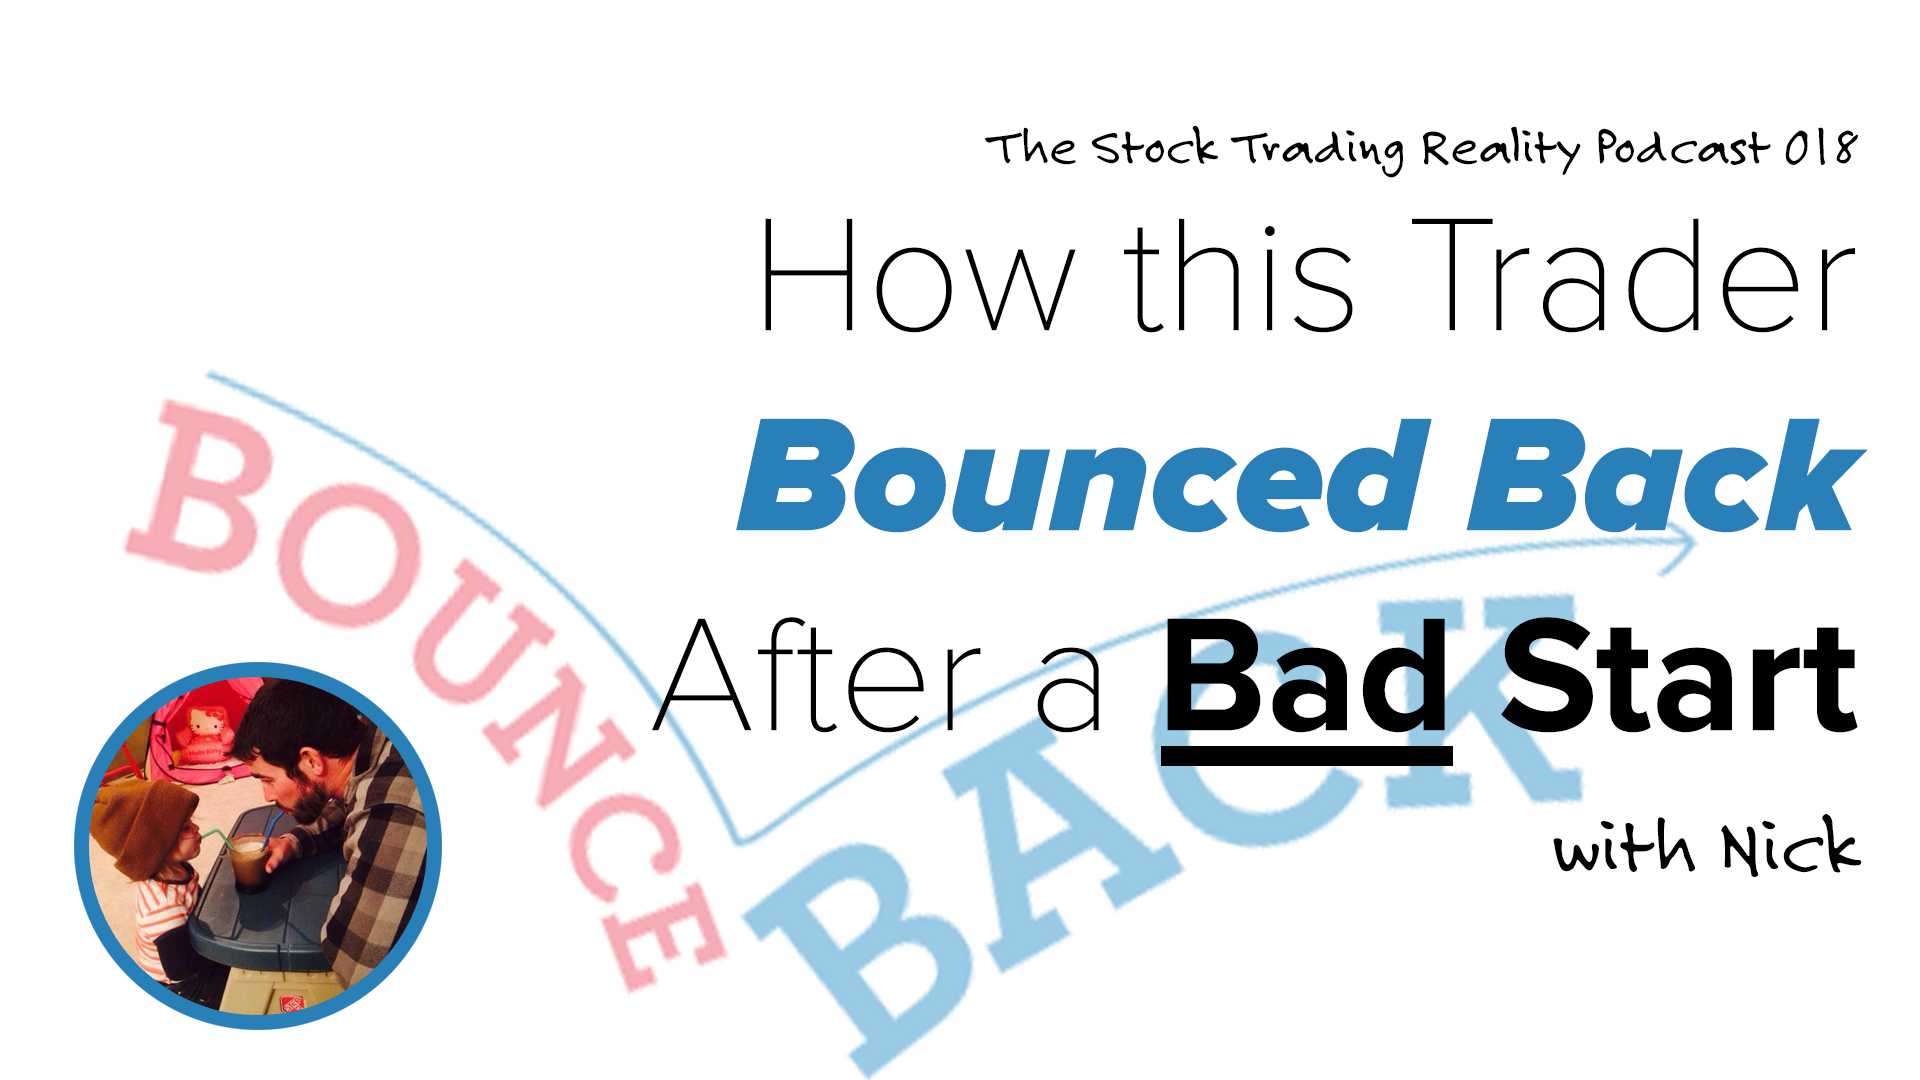 STR 018: How this Trader Bounced Back After a Bad Start